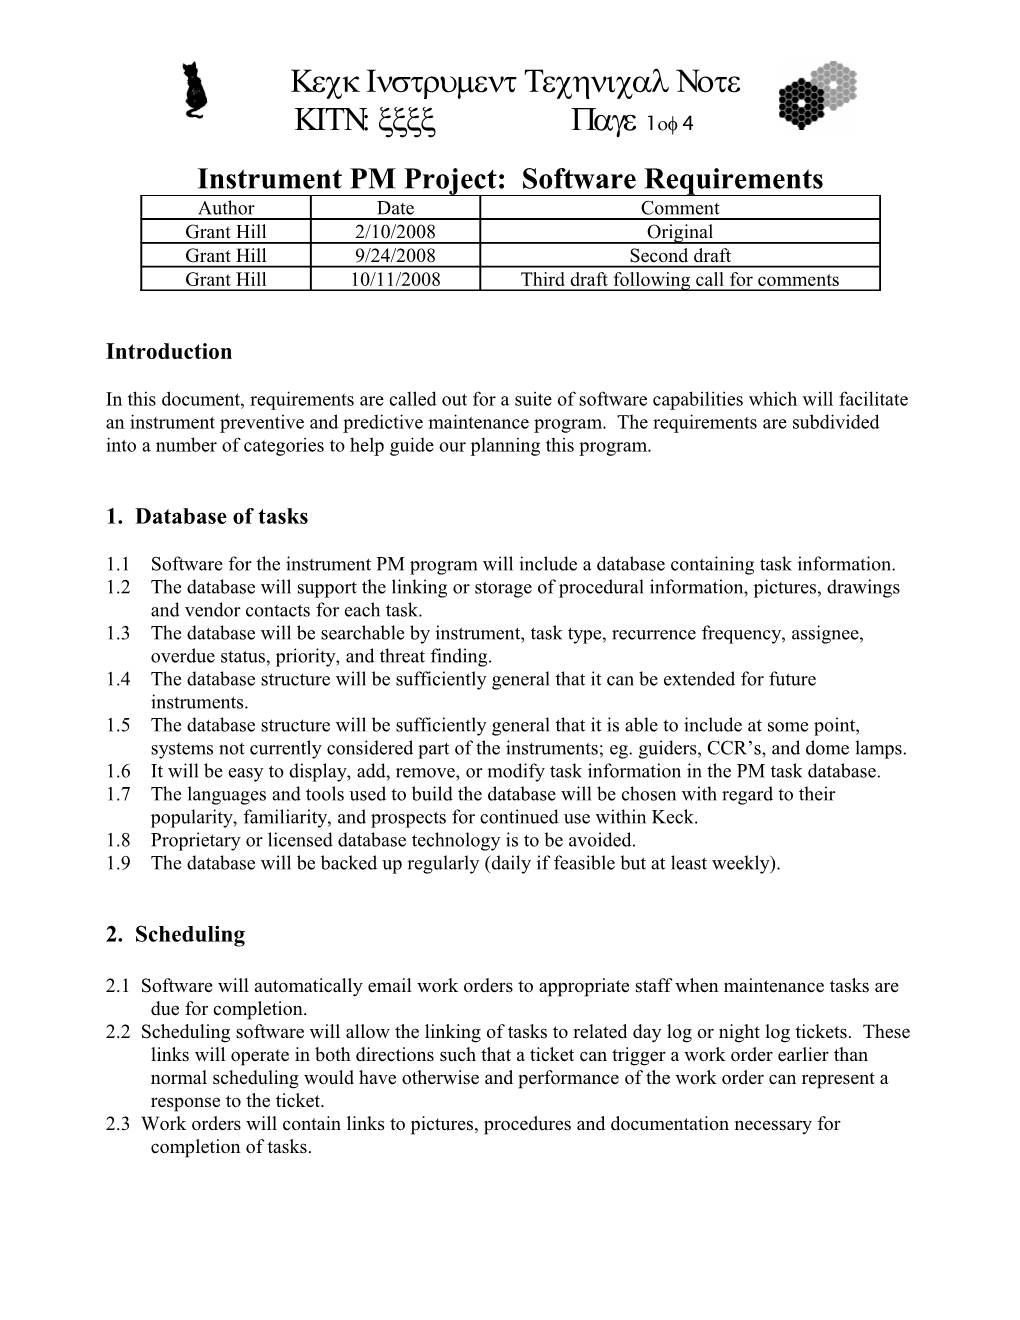 Instrument PM Project: Software Requirements